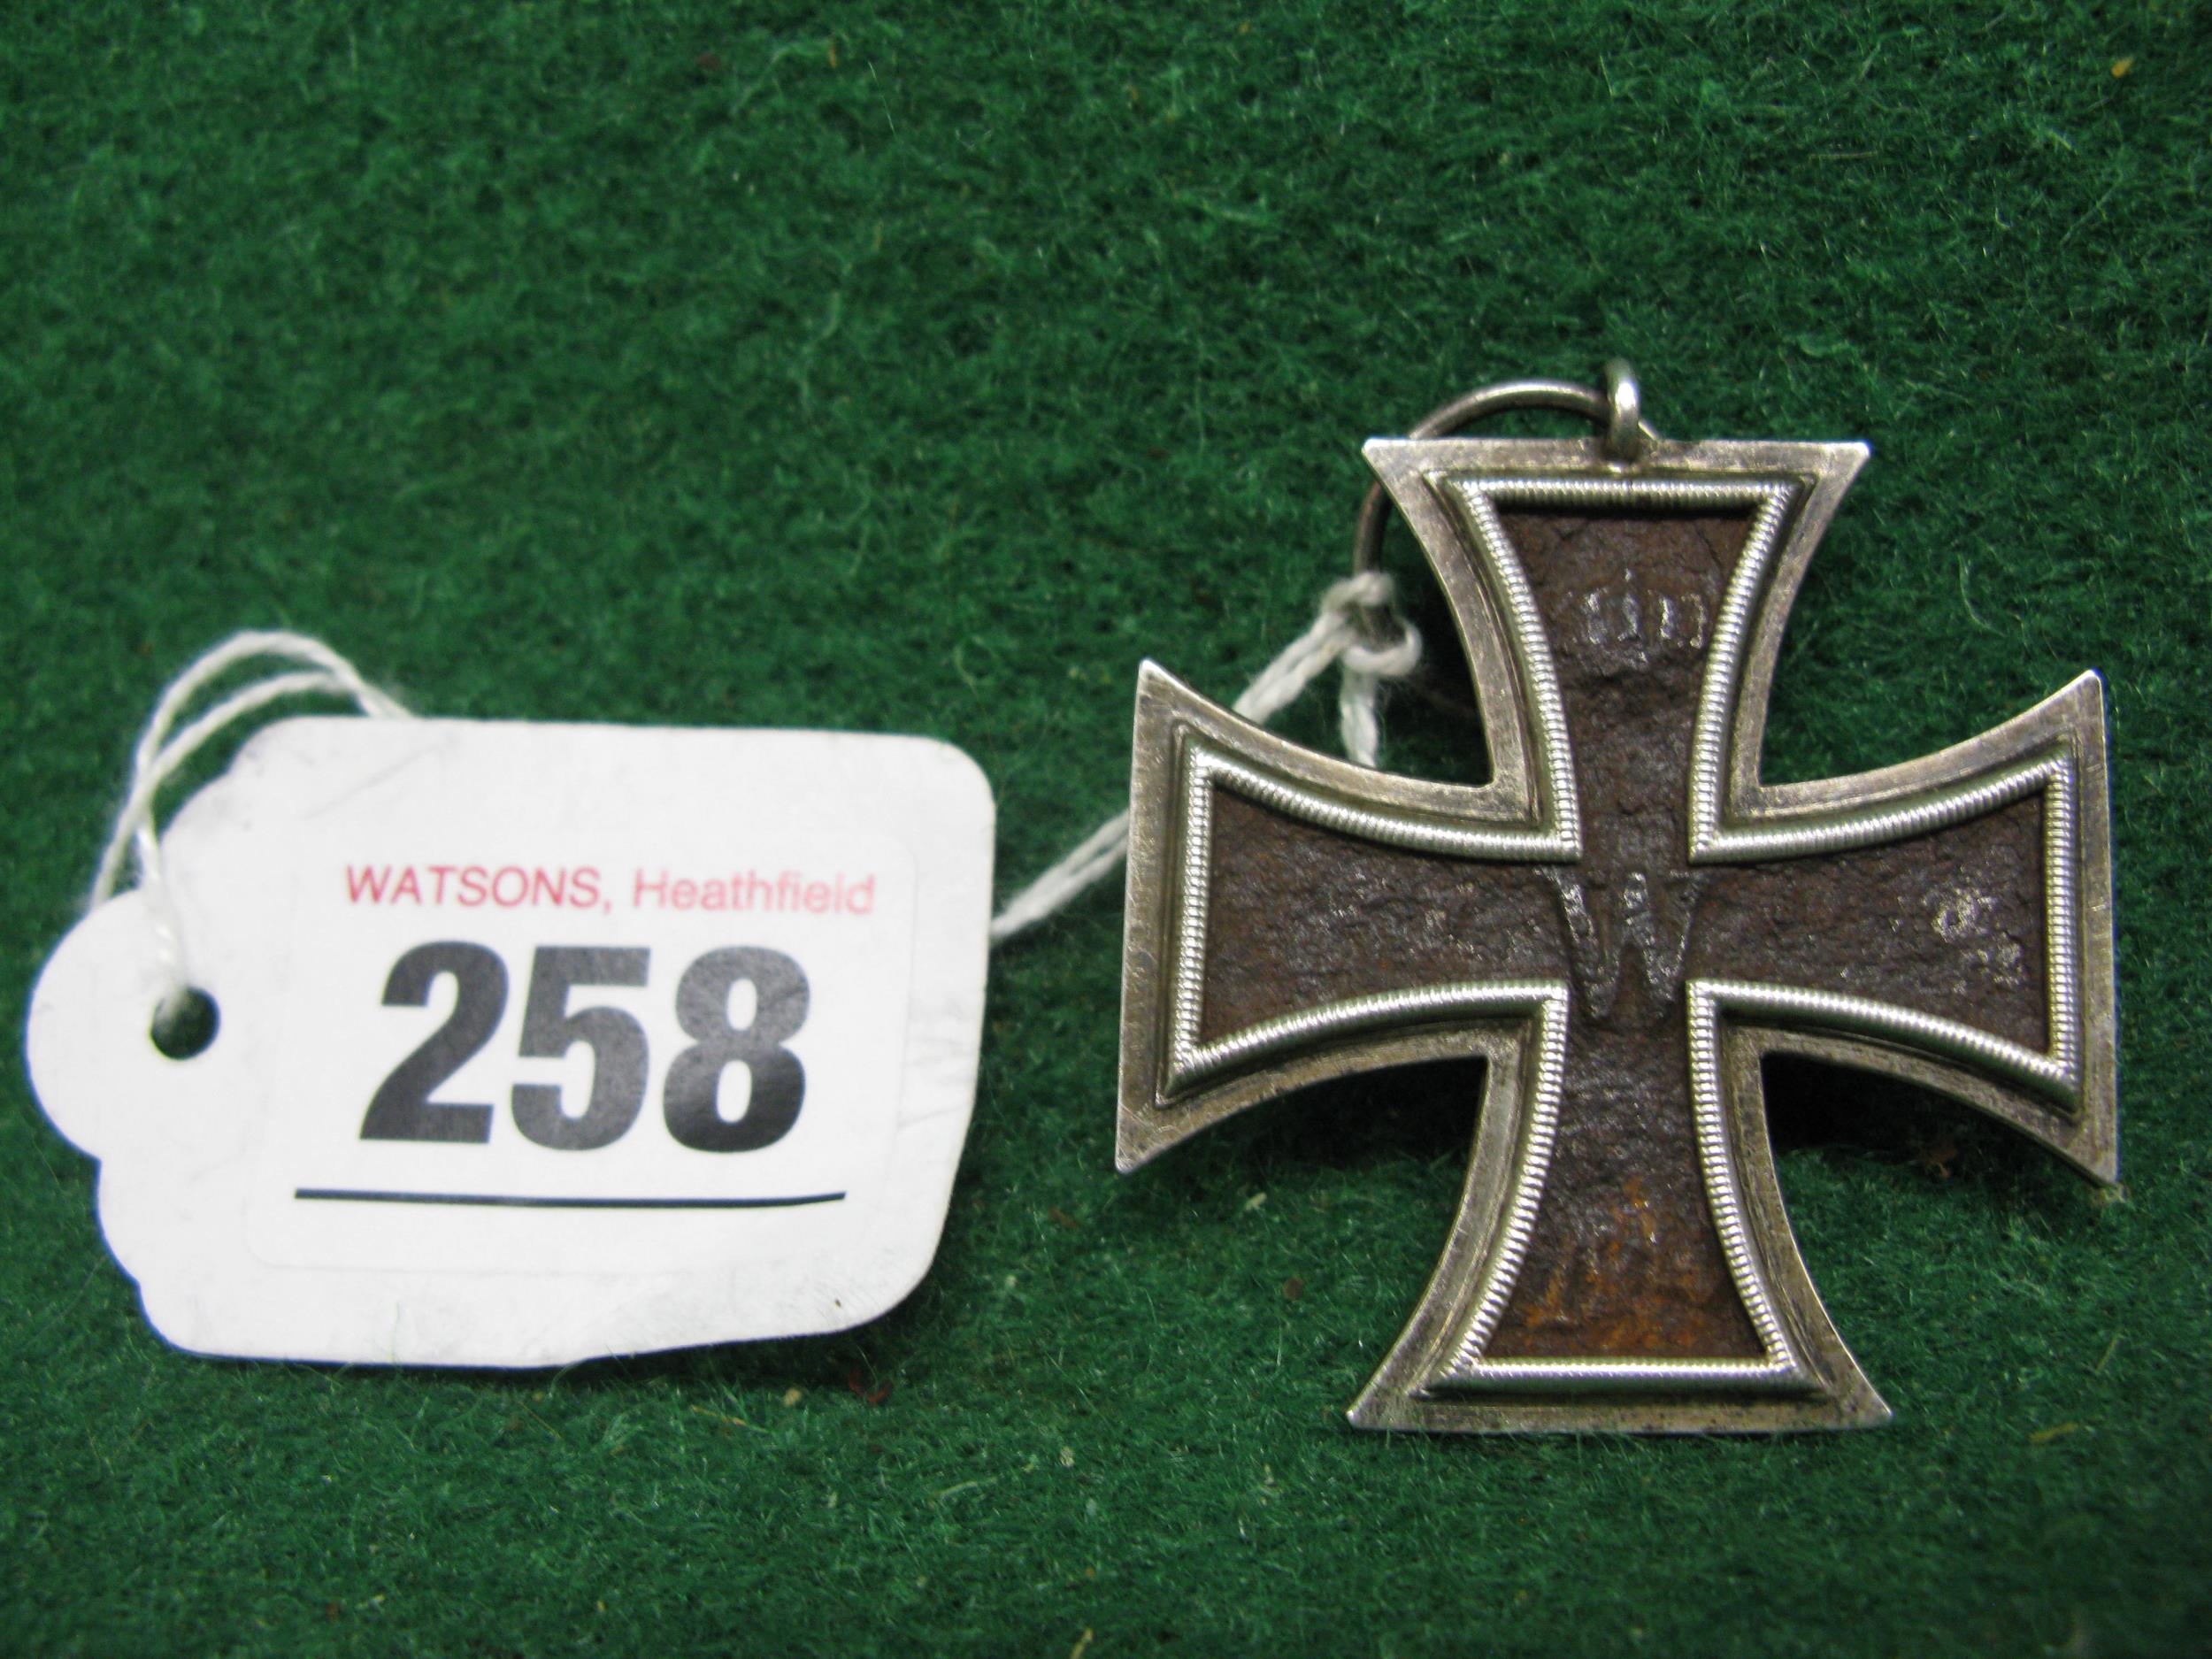 WWI battlefield relic German Military Cross with Crowns, W's and 1813 & 1914 embossed on either side - Image 3 of 3